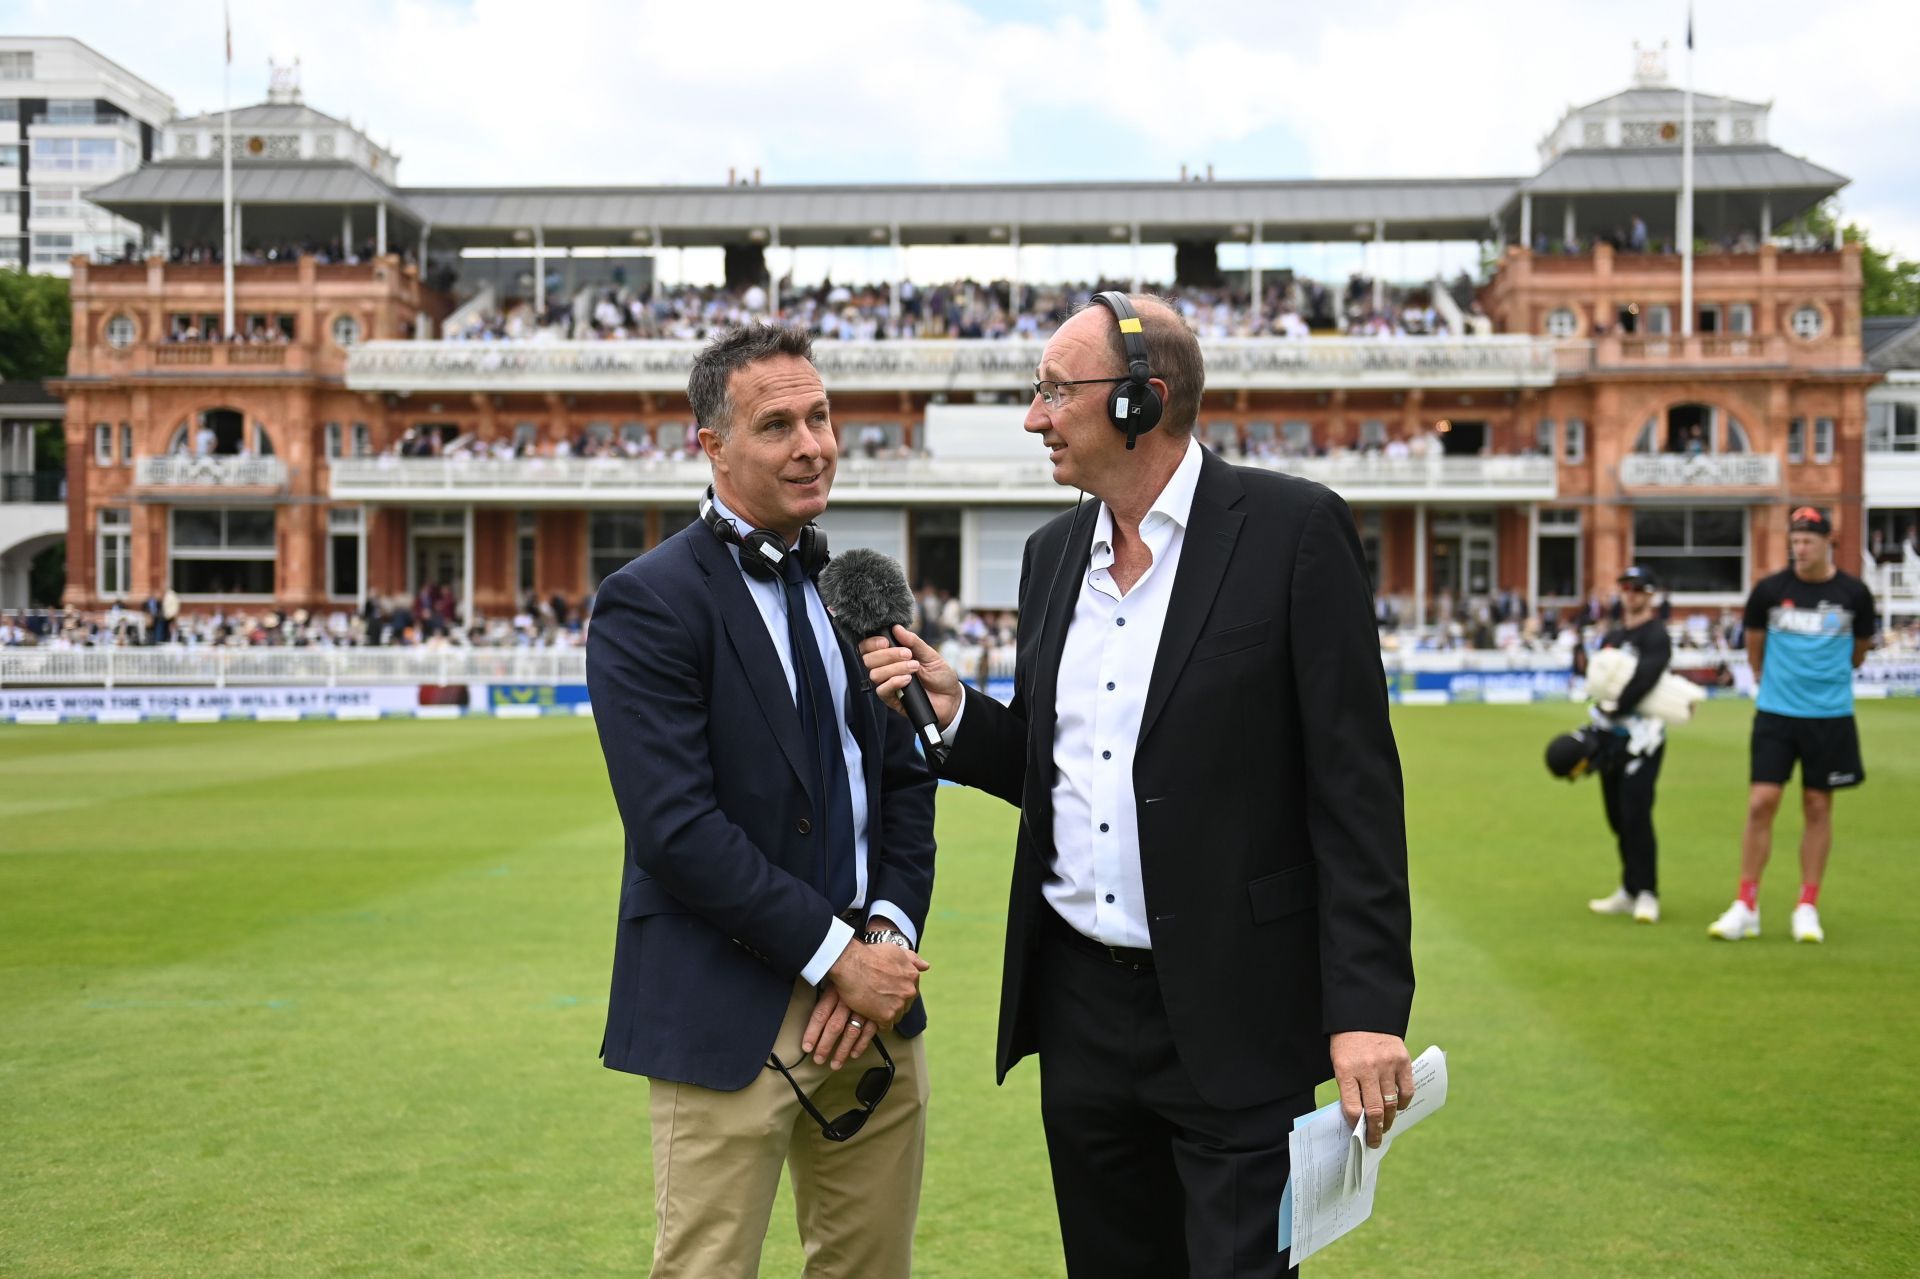 Michael Vaughan was not happy with England&#039;s decision to bowl first in Nottingham.